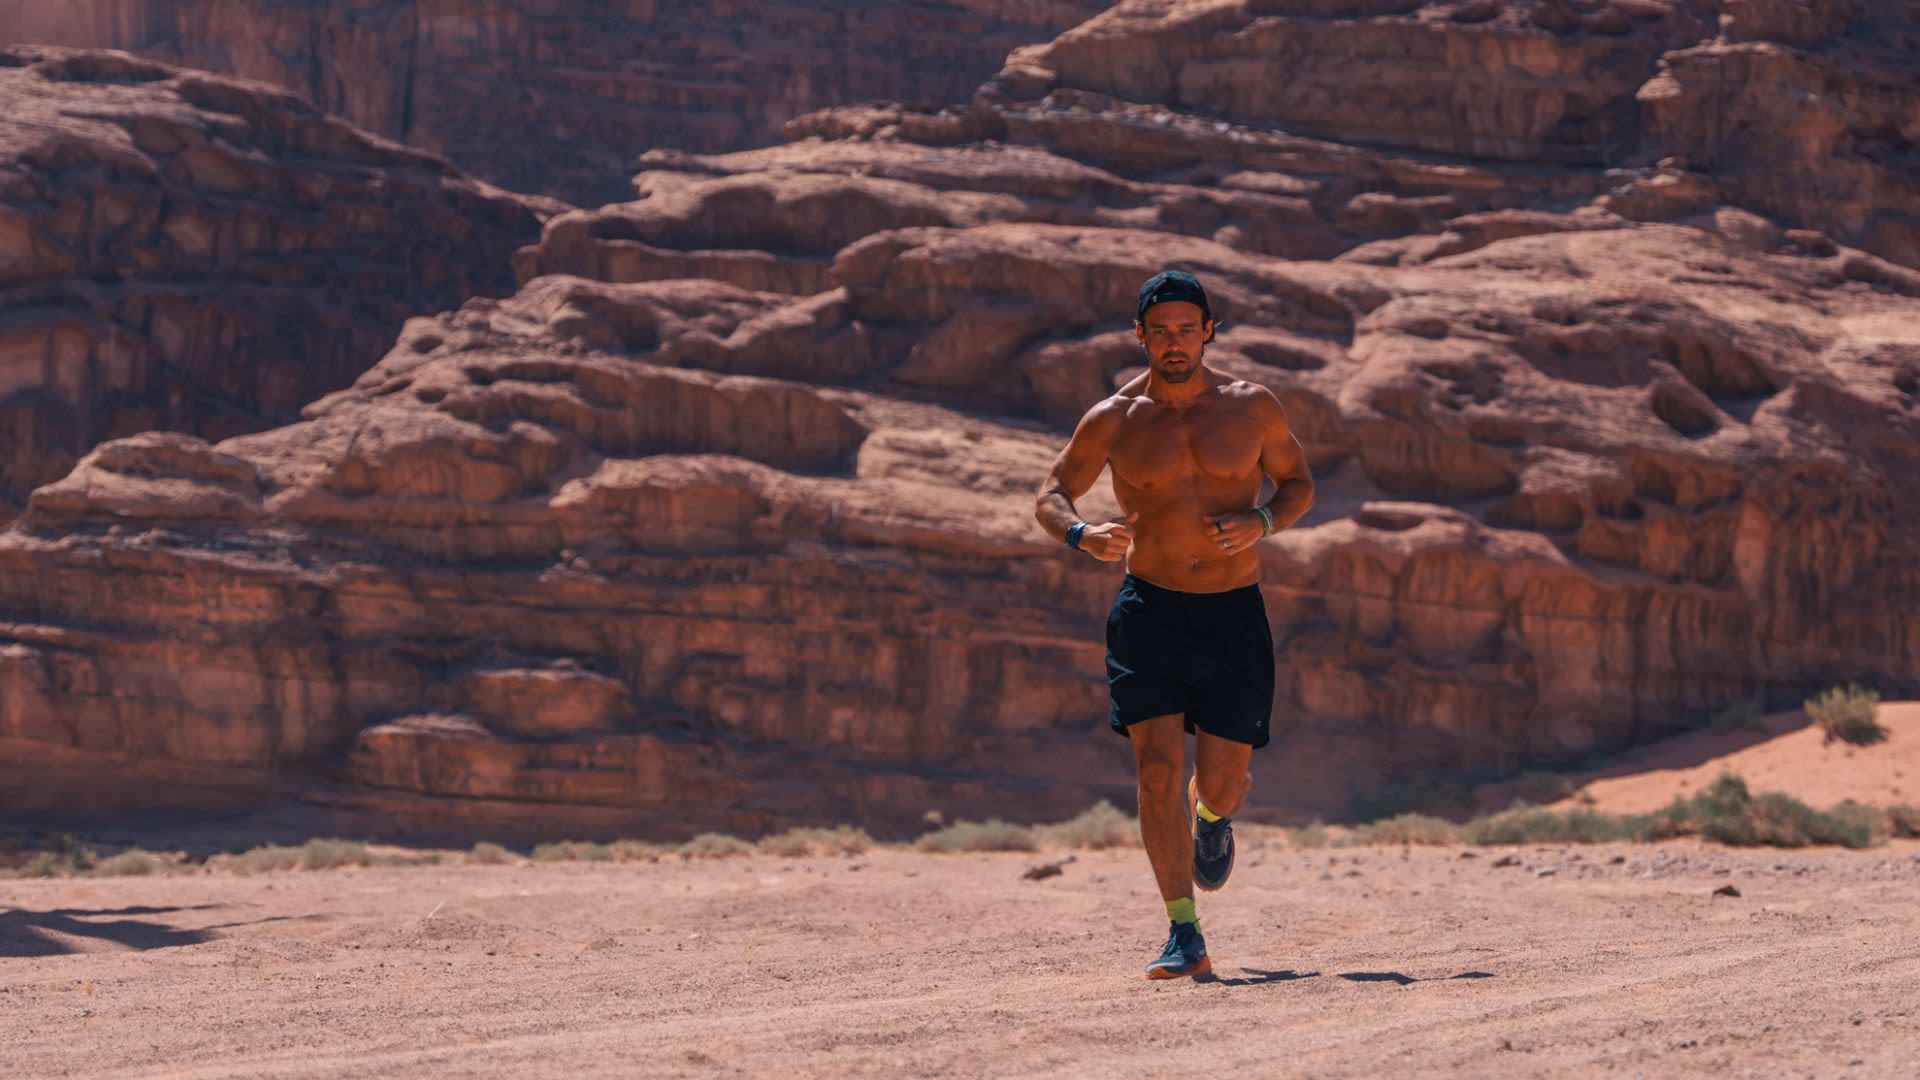 Spencer Matthews on running 30 marathons in 30 days: "I’m not worried my mind is going to give up"